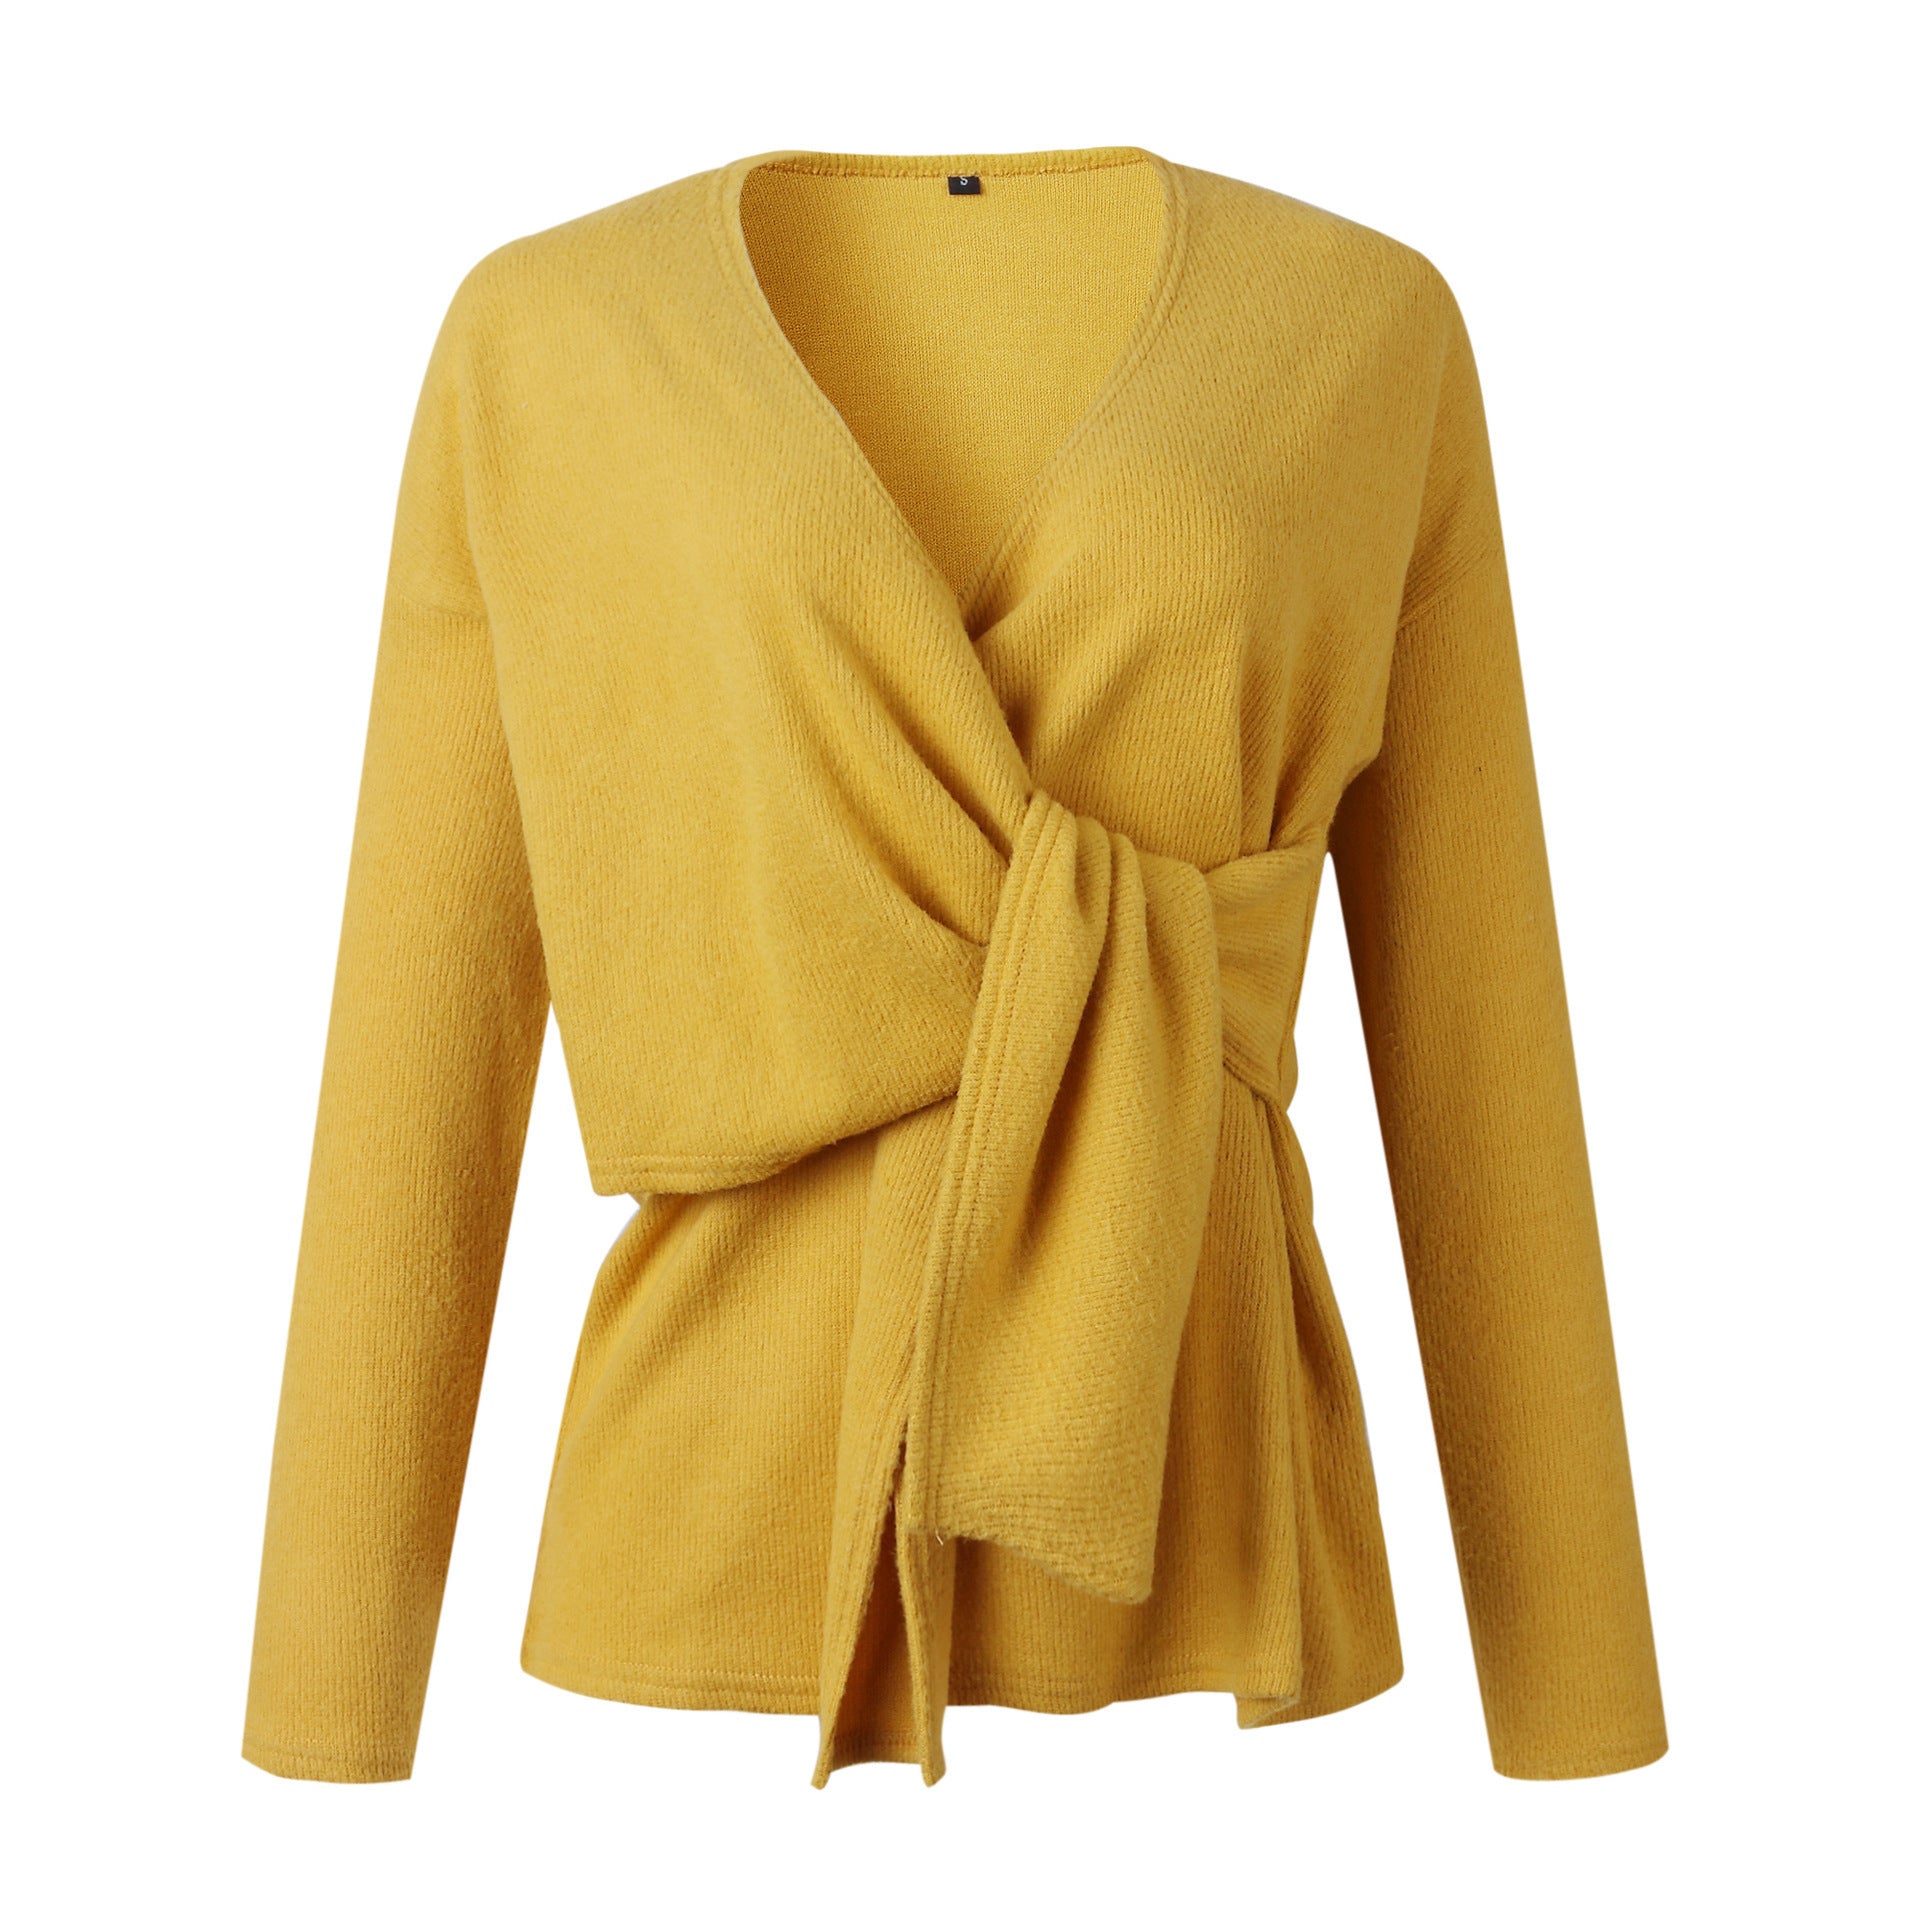 3 Colors Hot Sale Autumn And Winter Fashion V-neck Tie Long-sleeved Blouse